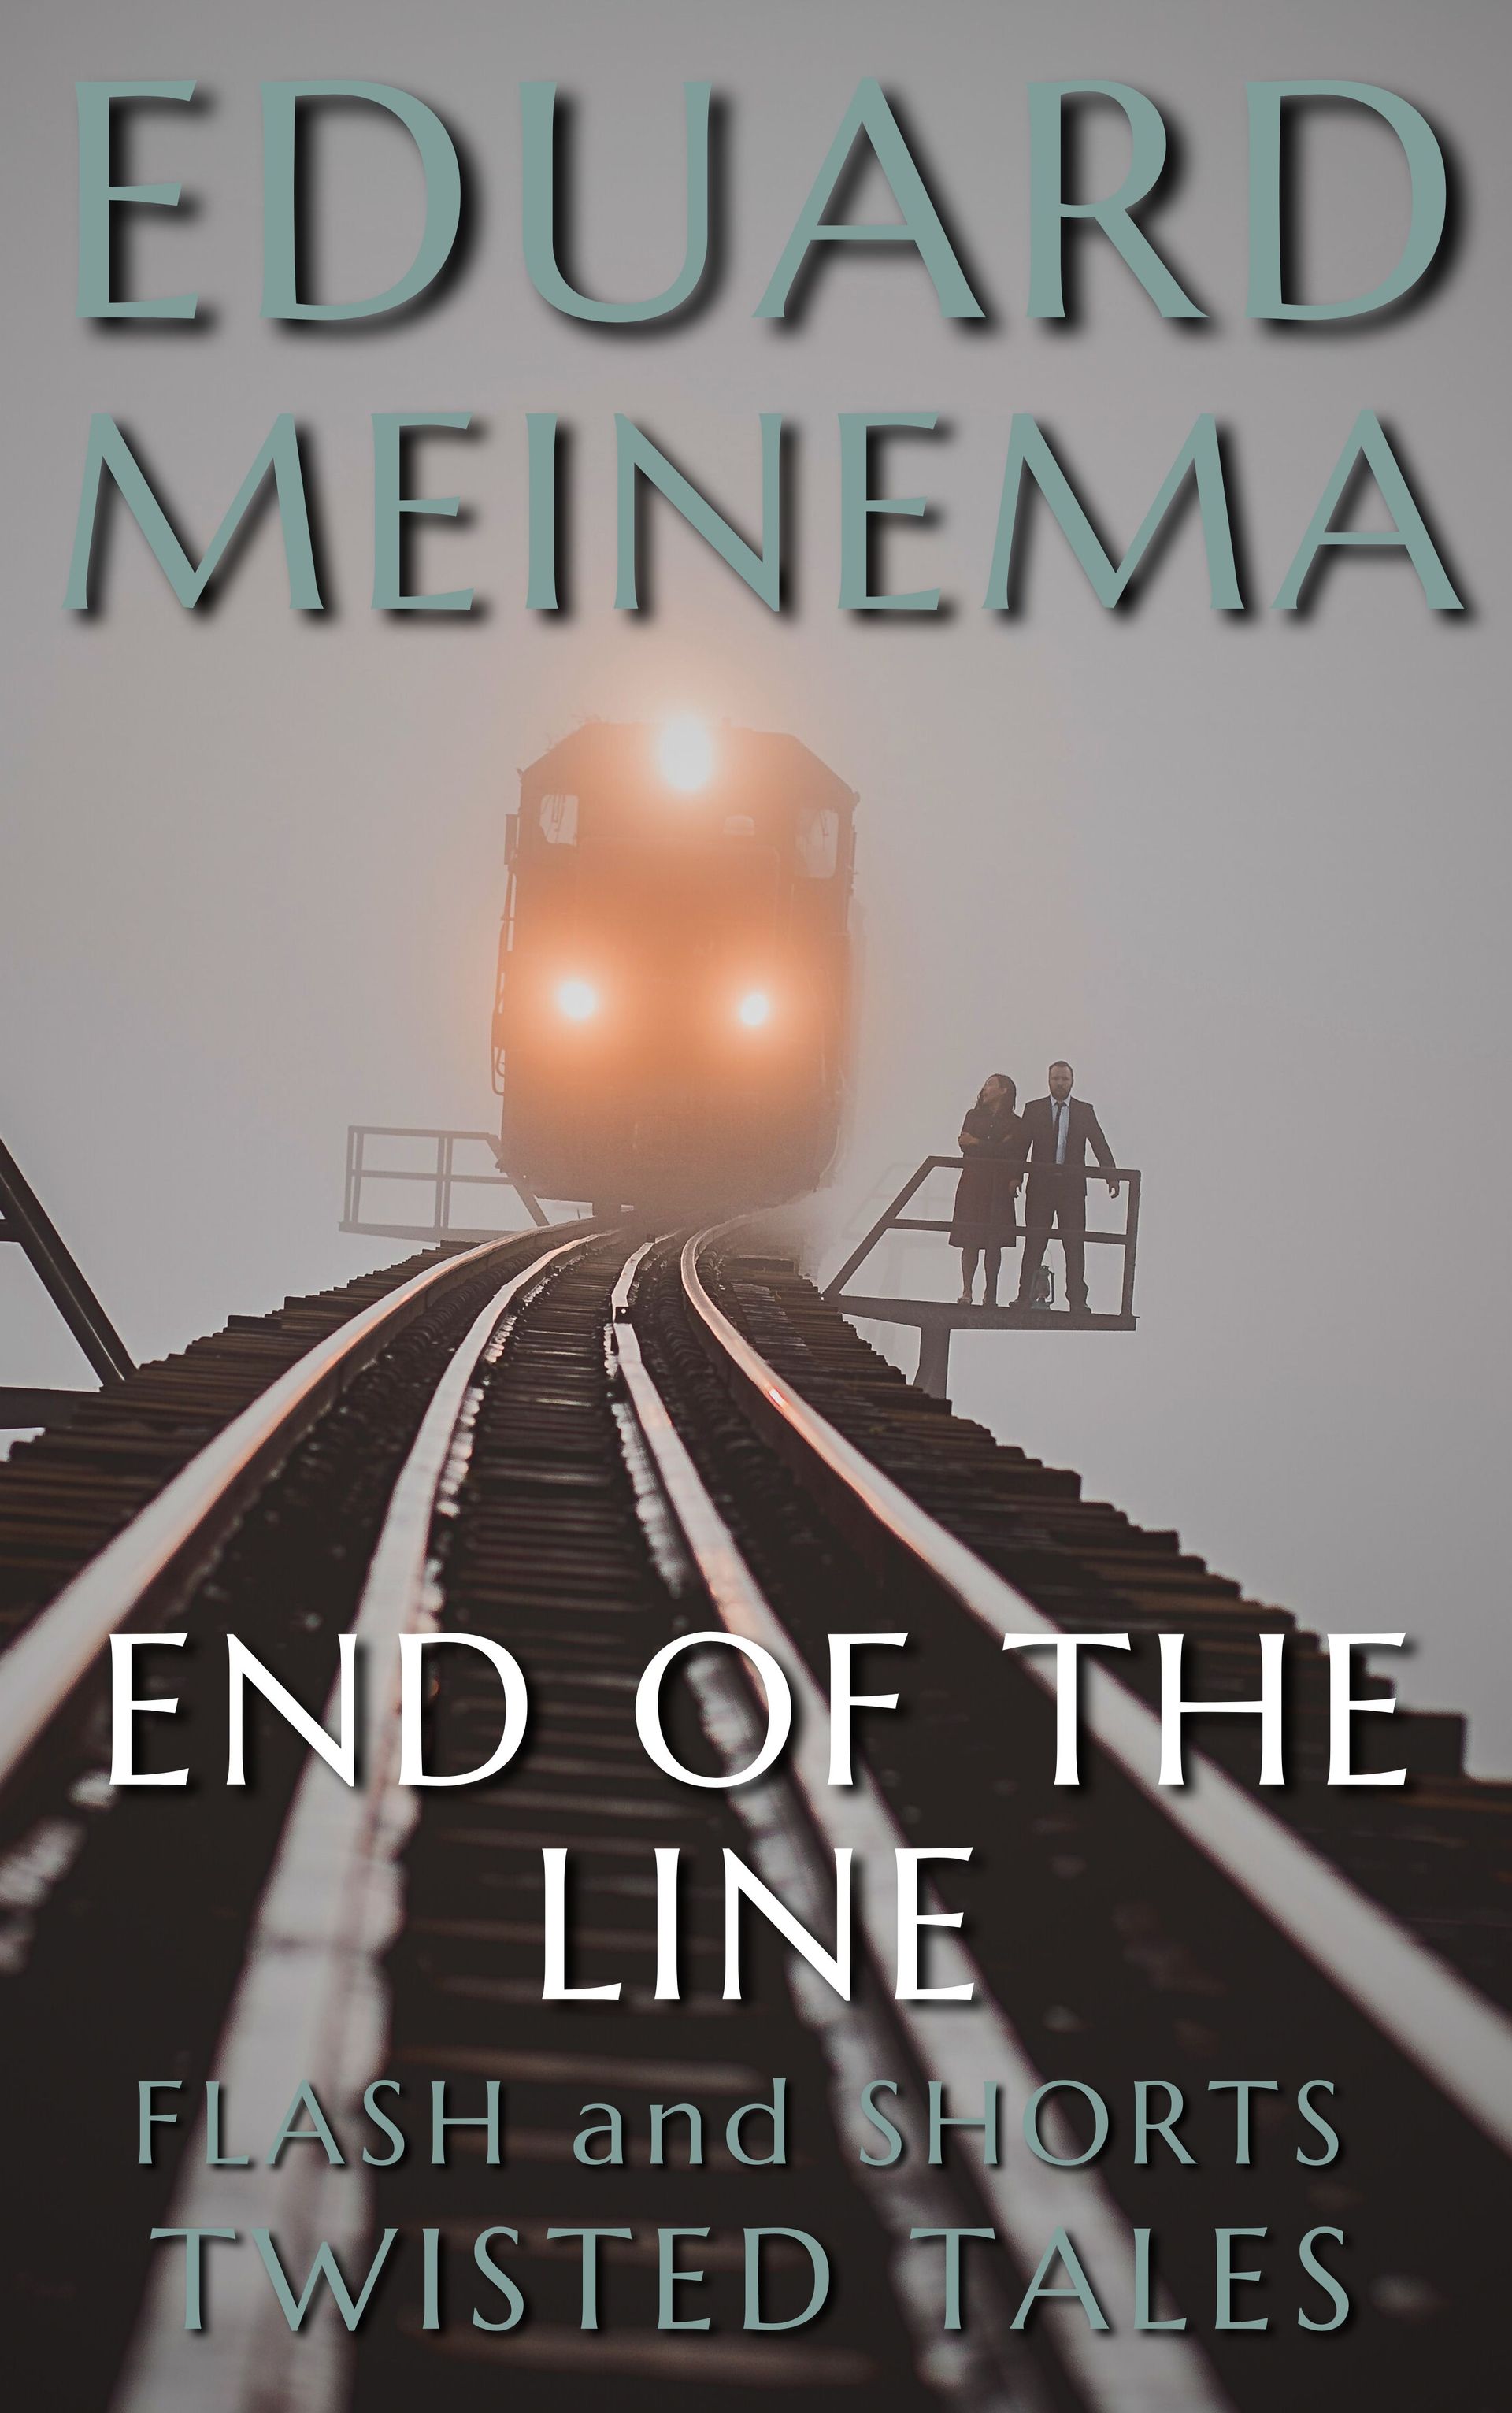 End of the Line, Flash Fiction story by Eduard Meinema.